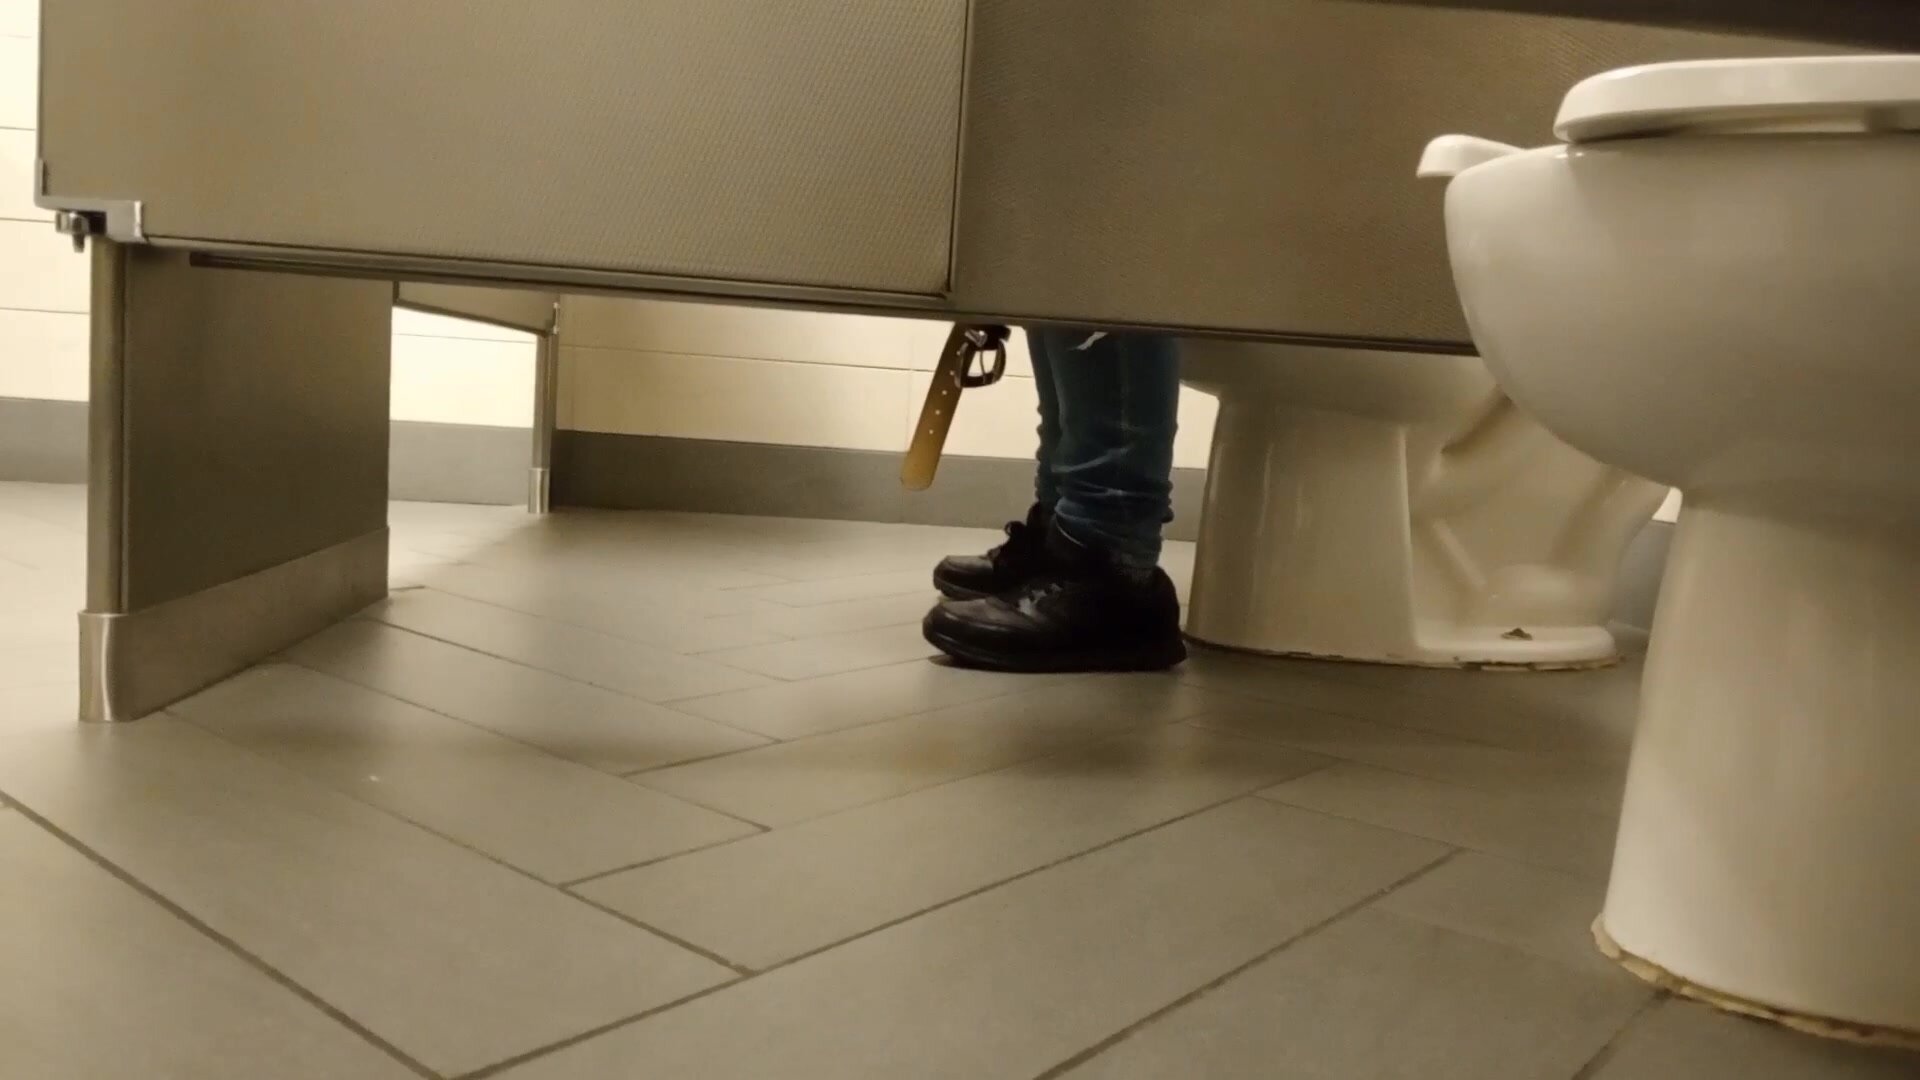 Mall girl dumping and farting